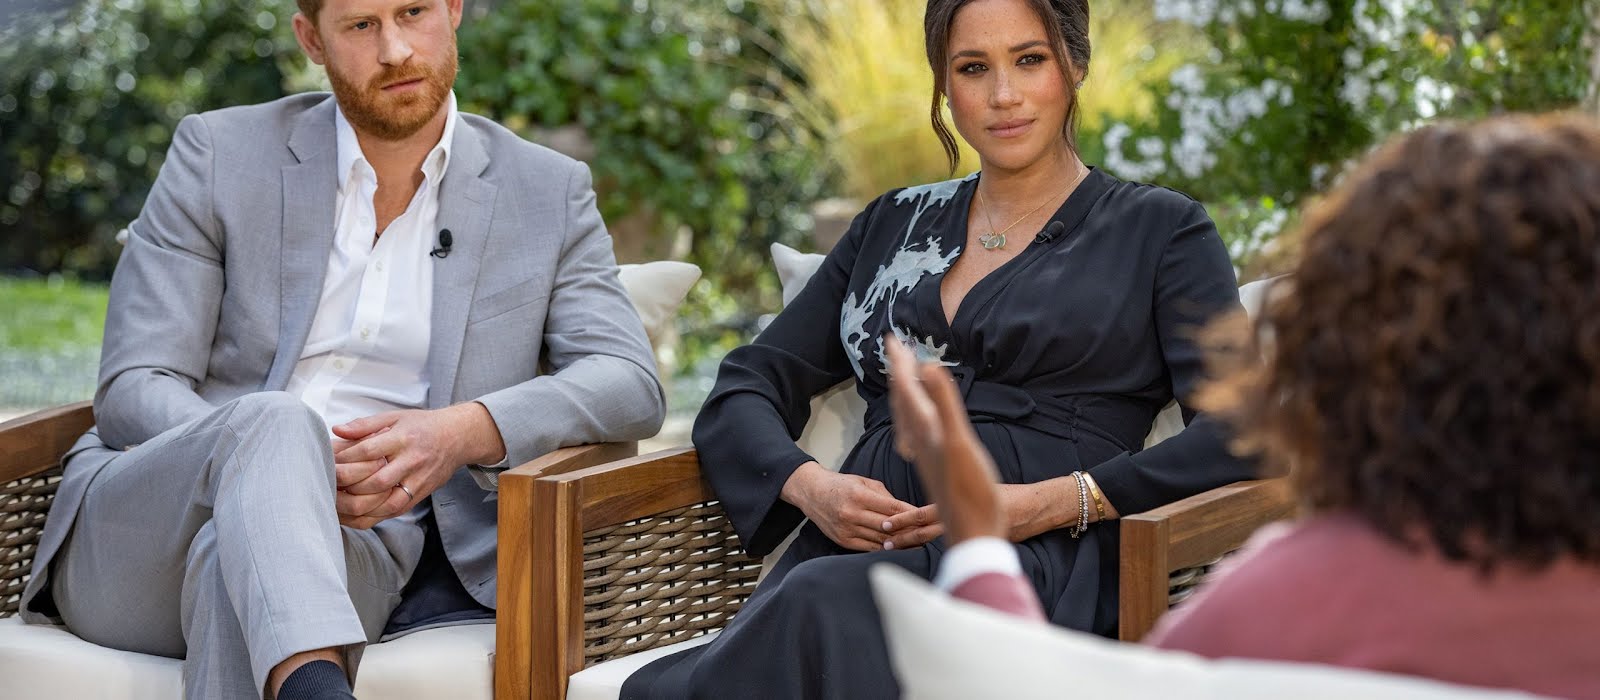 Here’s what was left out of Prince Harry and Meghan Markle’s Oprah interview